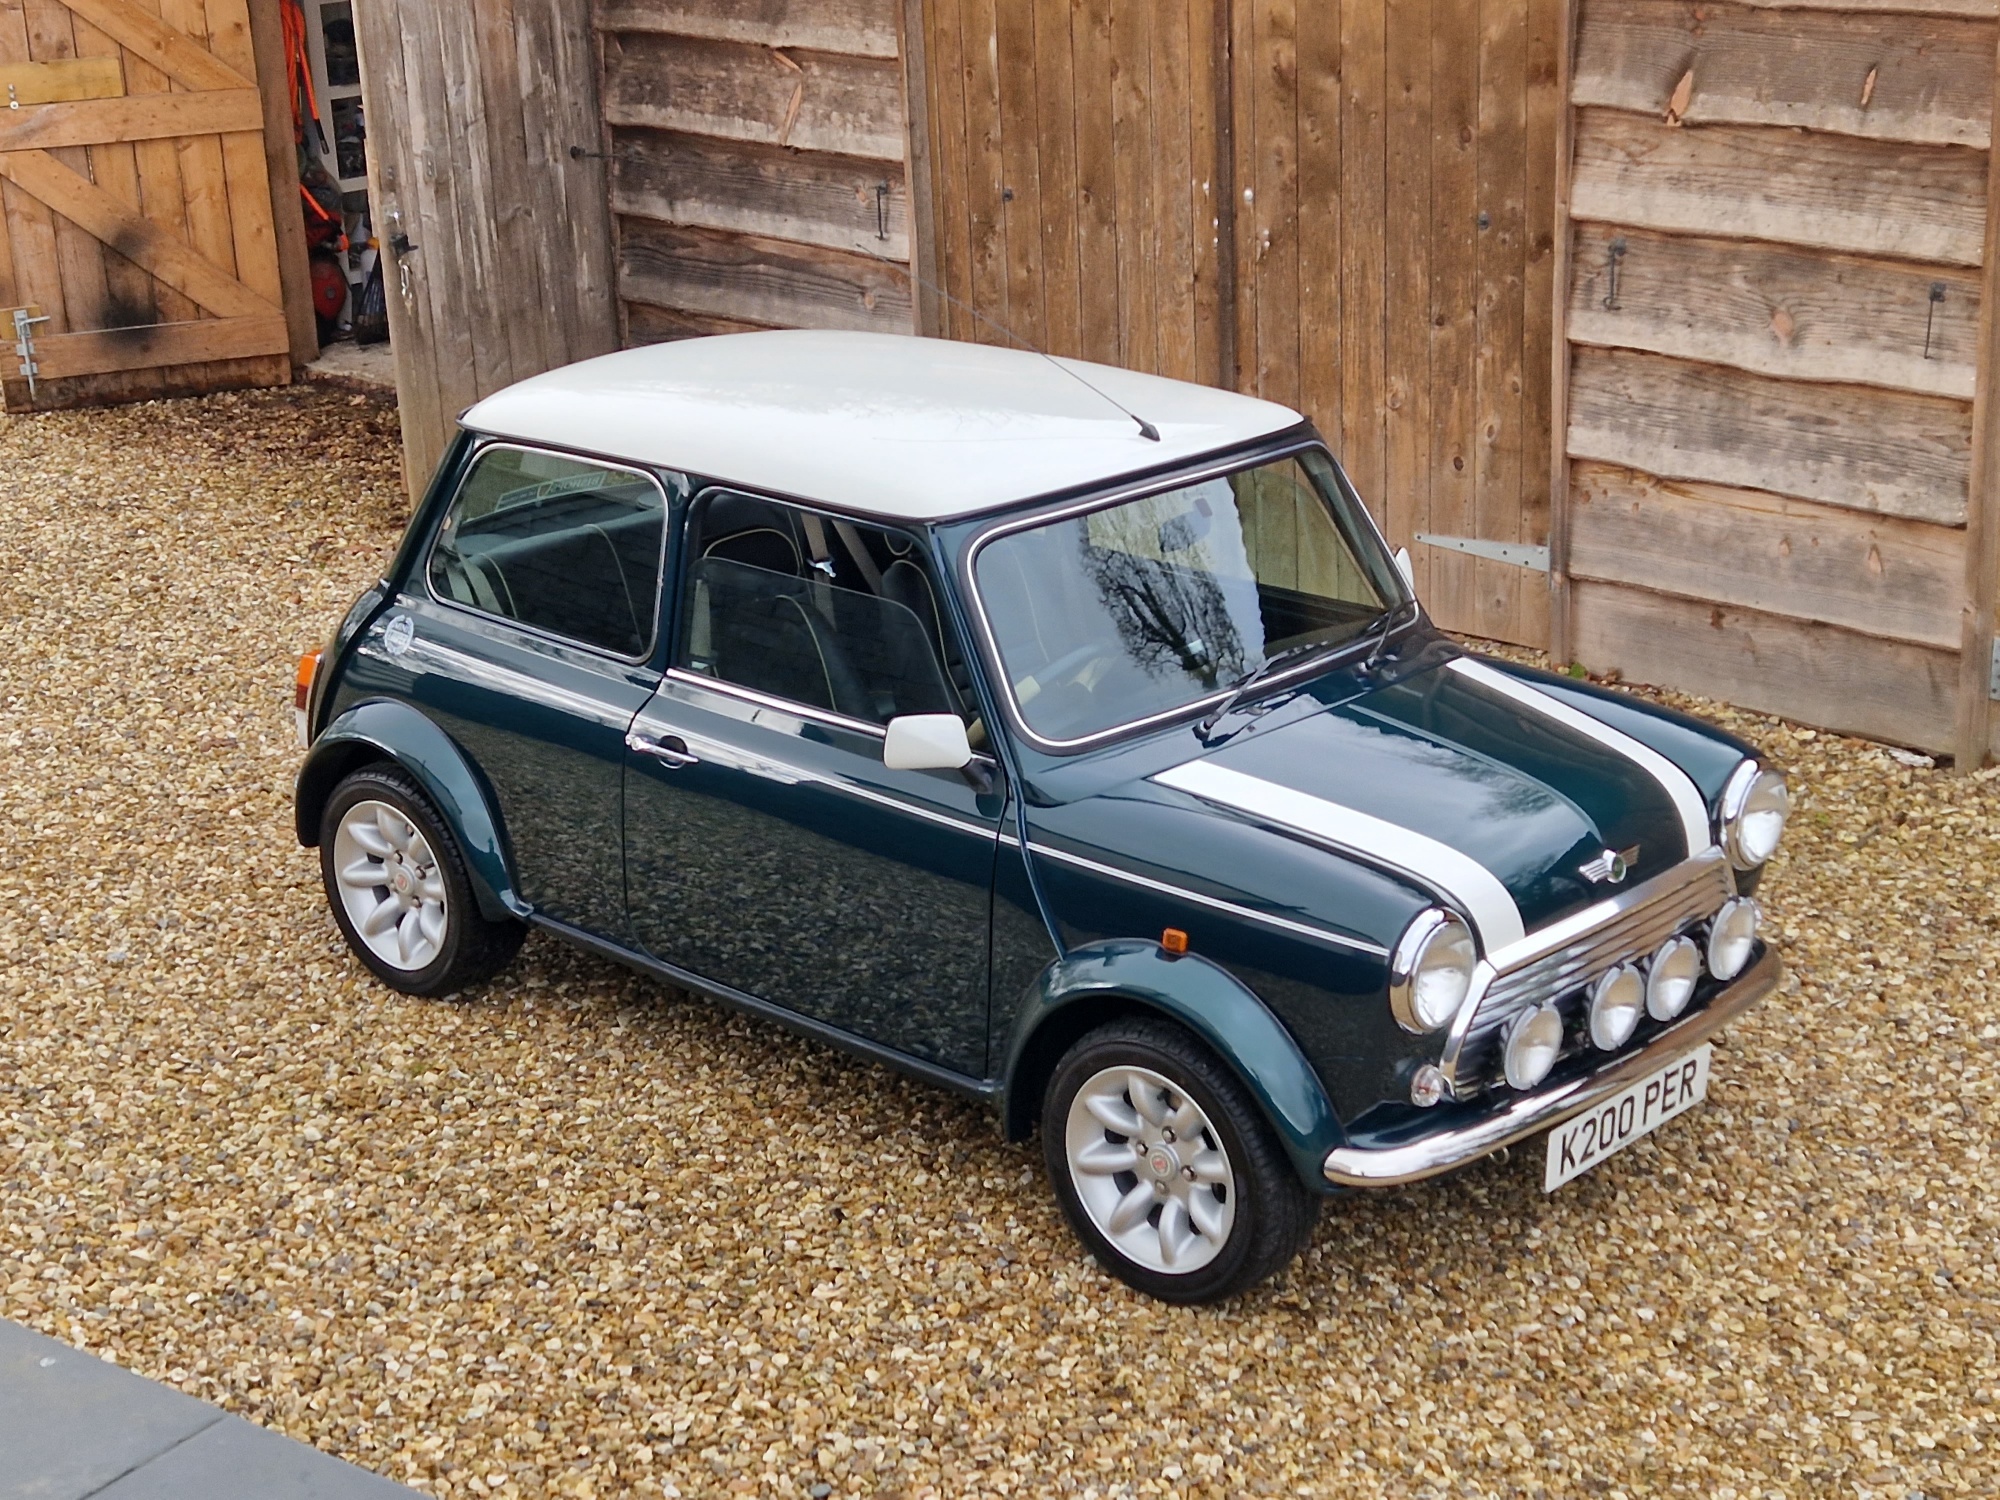 ** NOW SOLD ** Stunning Mini Cooper Sport On Just 8100 Miles In 25 Years!